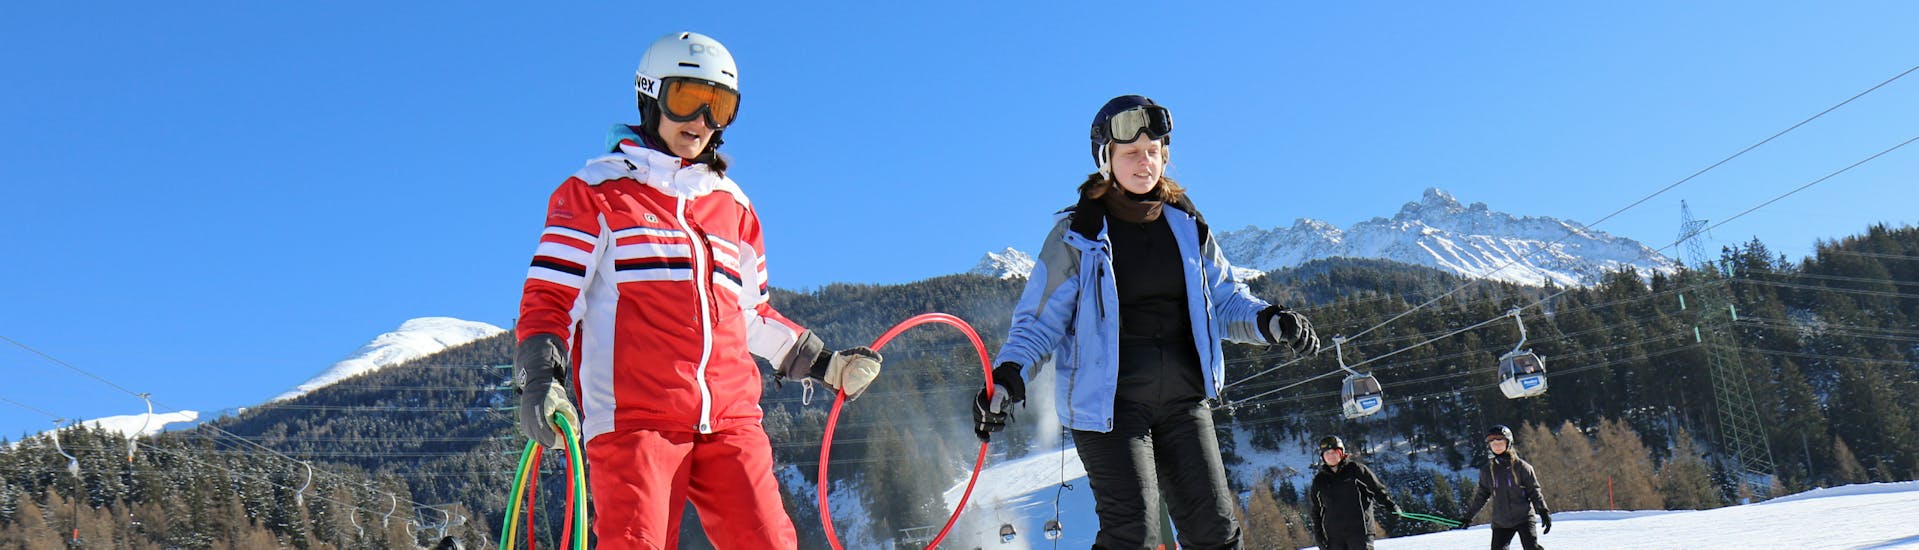 Private Ski Lessons for Adults - Nauders.